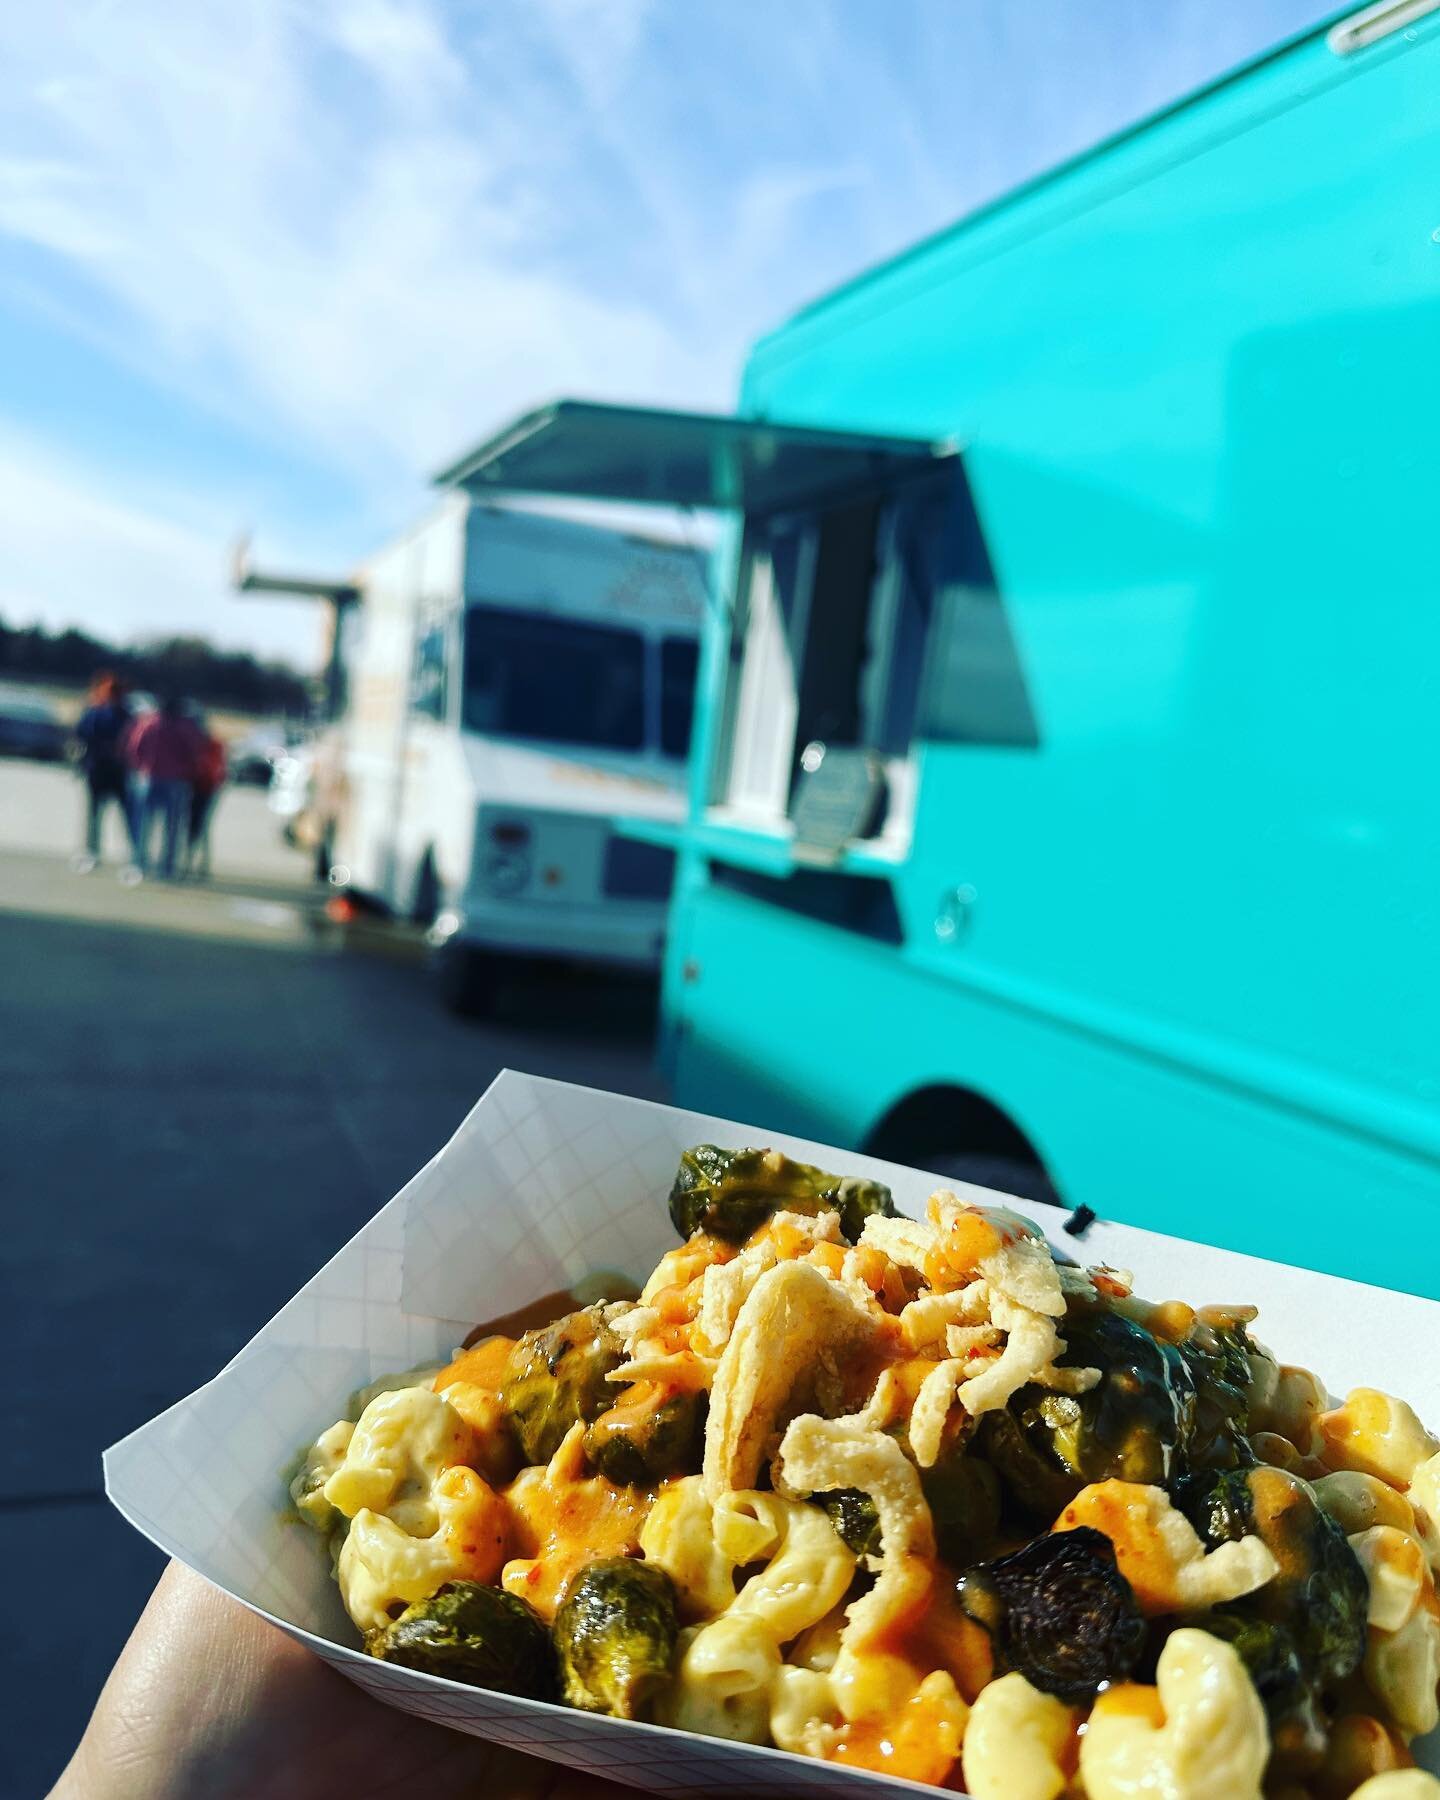 We are serving up ruta-bangin&rsquo; nachos + Brussels Mac + &ldquo;cheese&rdquo; (with fried onions and chipotle drizzle) at @victresslnk until 2pm! Open to the public, and tons of local vendors inside! 

South-side Rutti&rsquo;s - come see us!